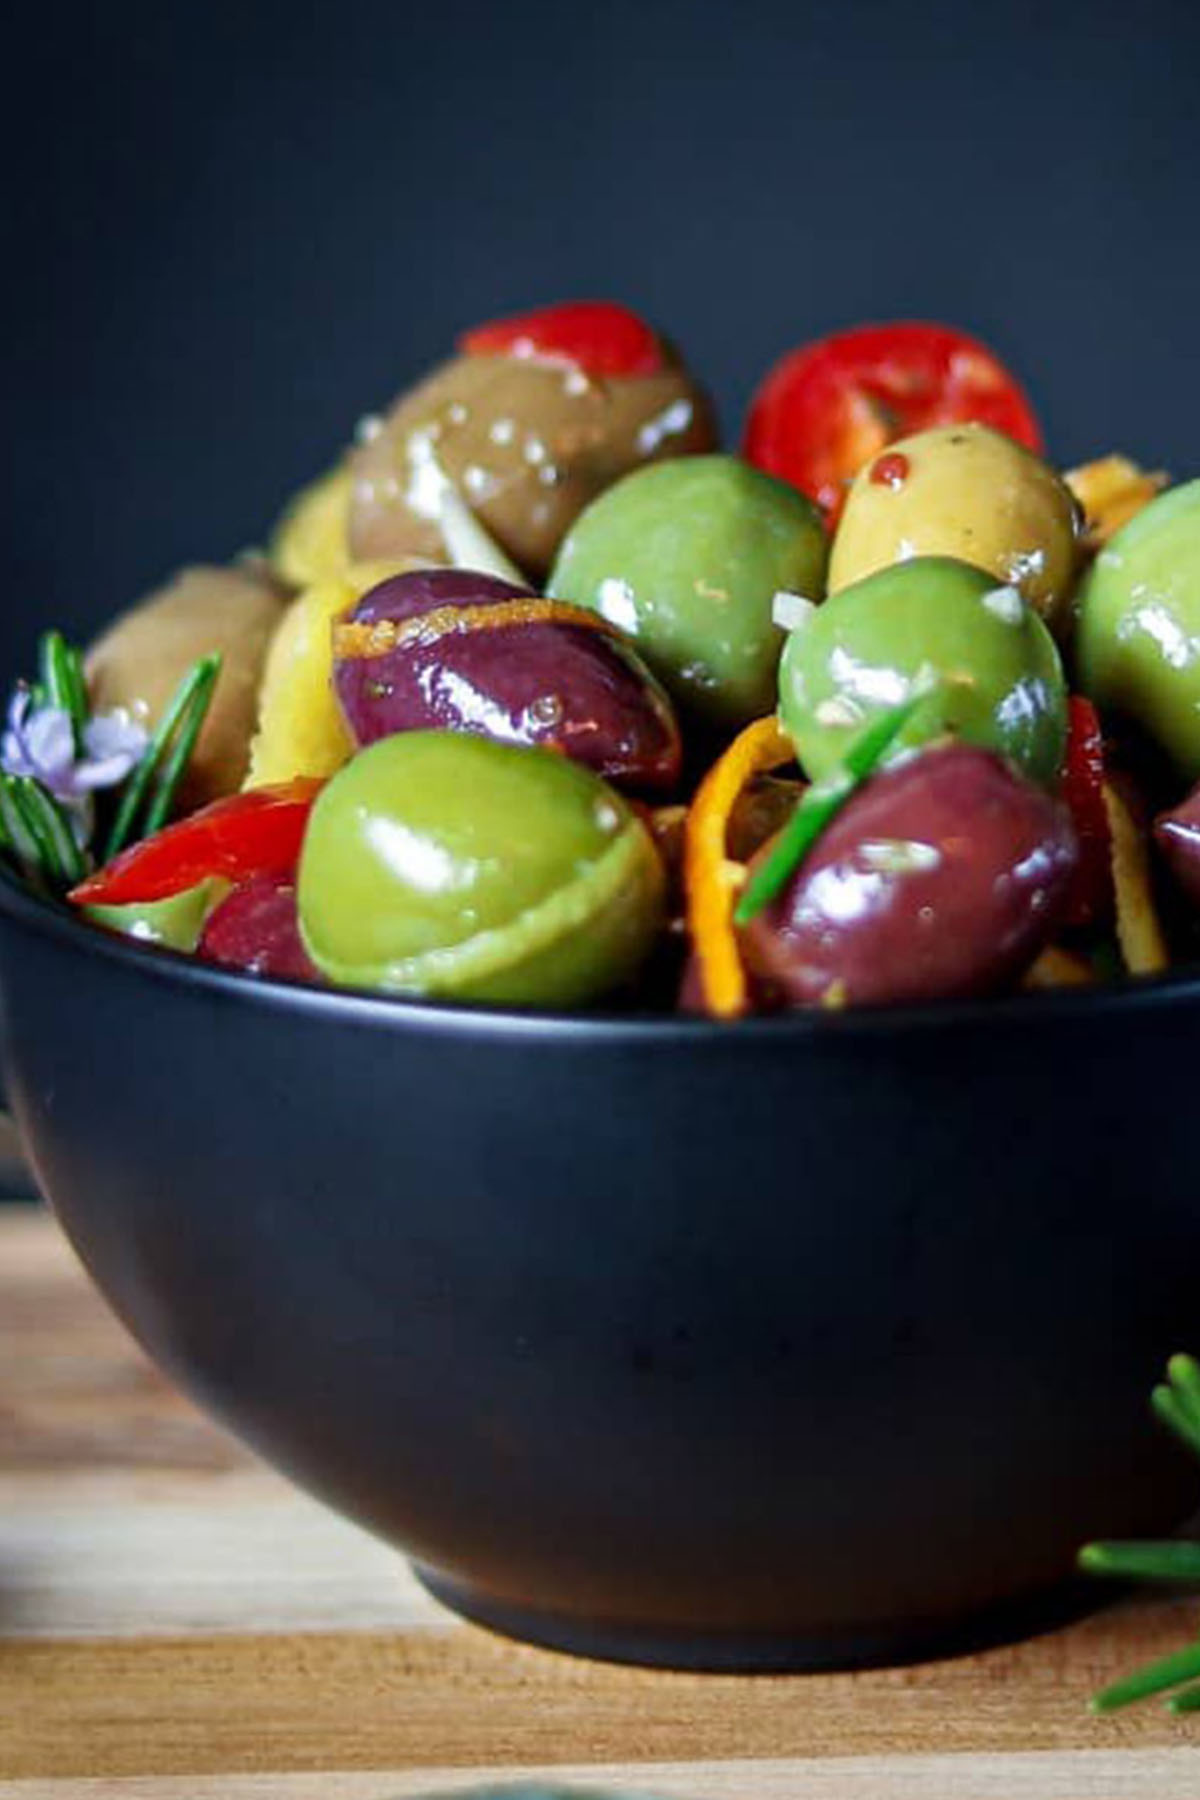 green and purple olives in a blue serving bowl.